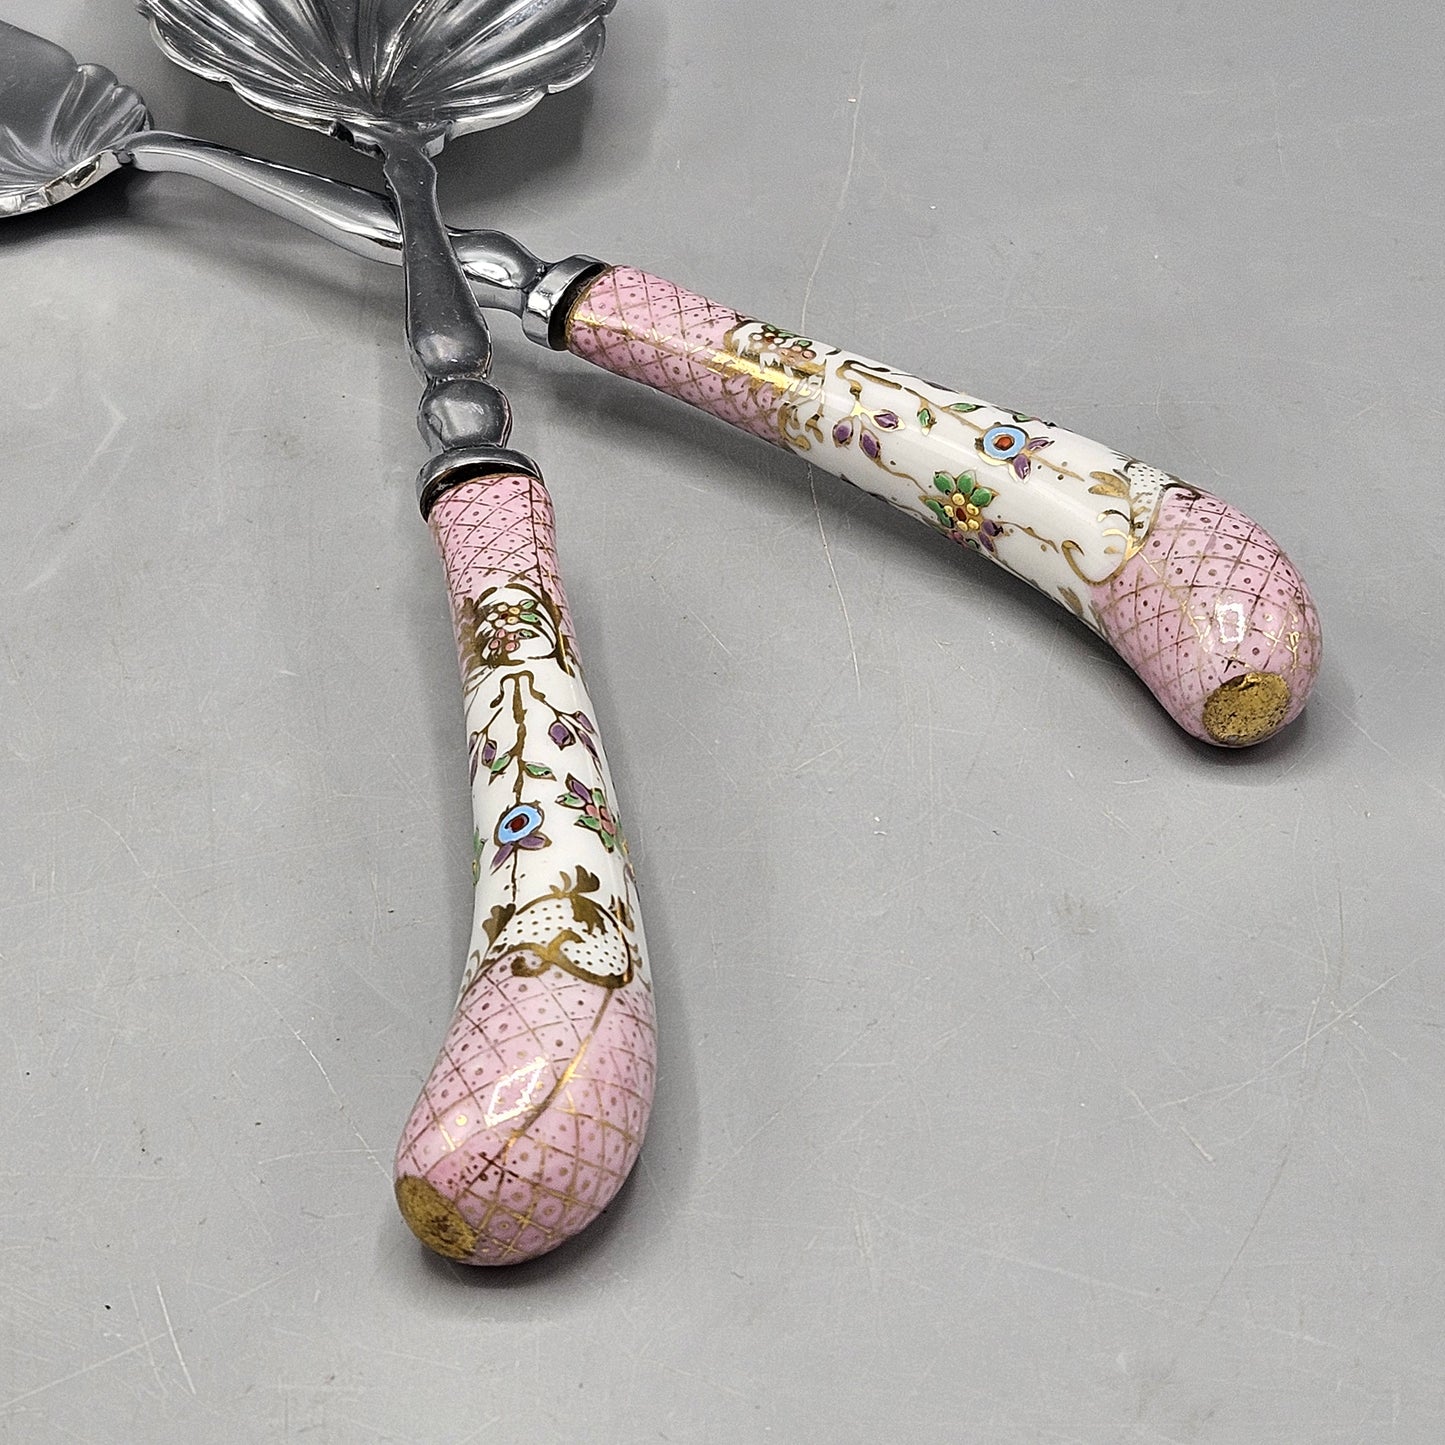 Pair of Vintage Sheffield Cutlery Carving Spoon & Fork Set Made In England with Floral Handle